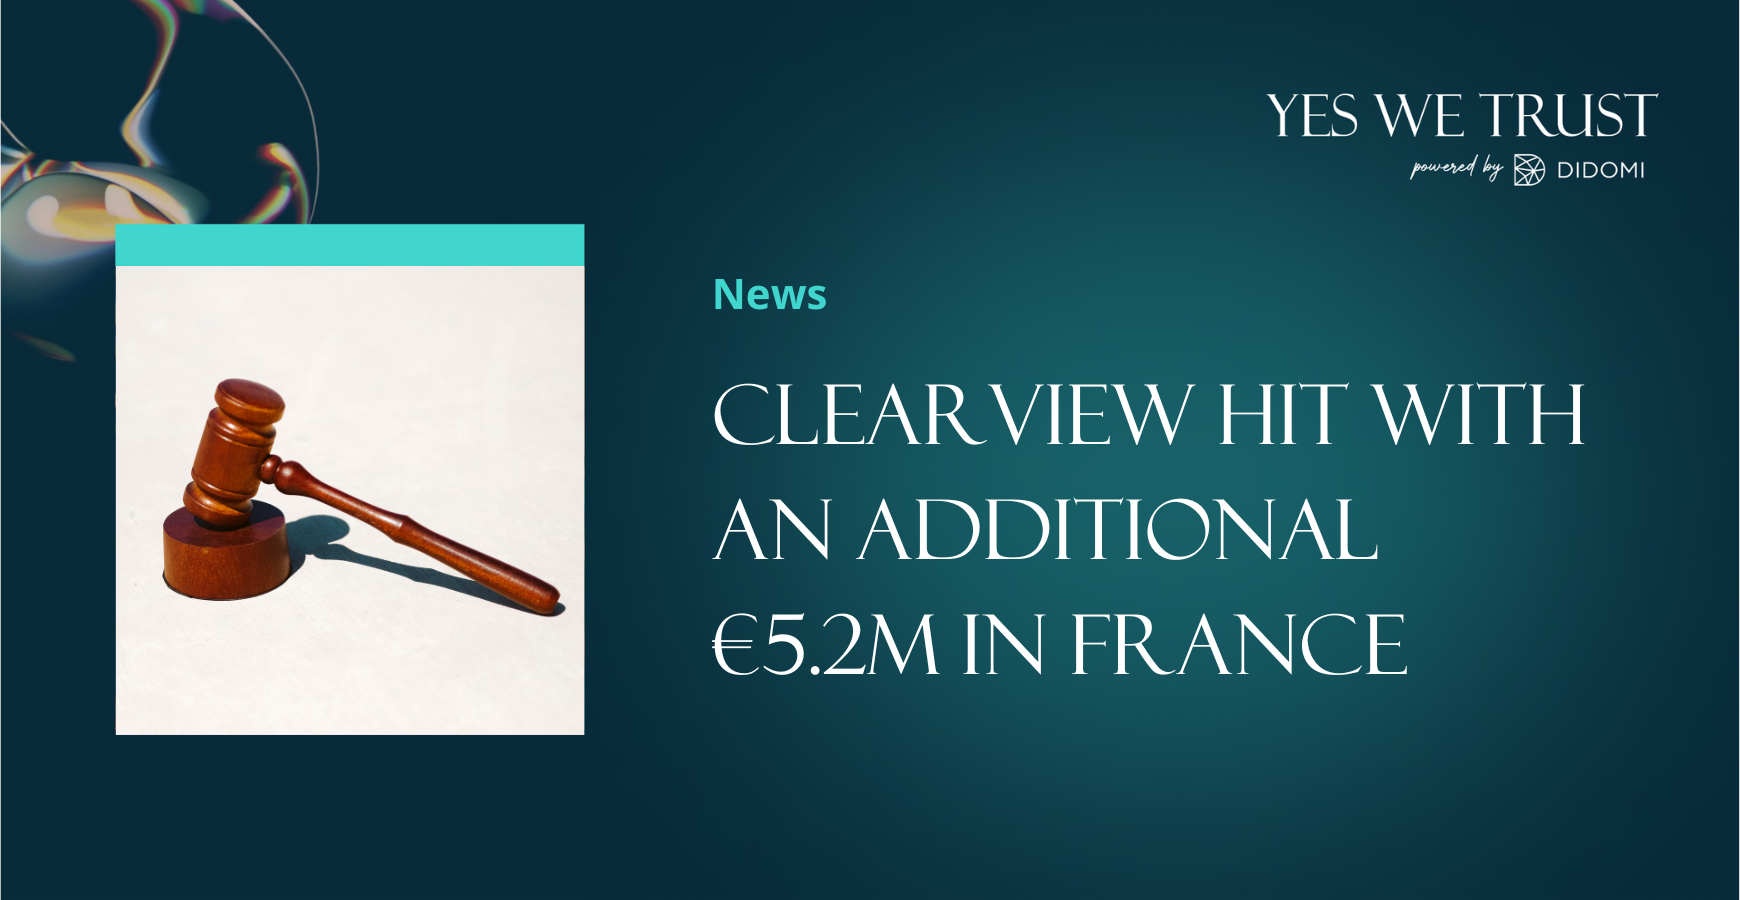 Clearview hit with an additional €5.2M by the French DPA